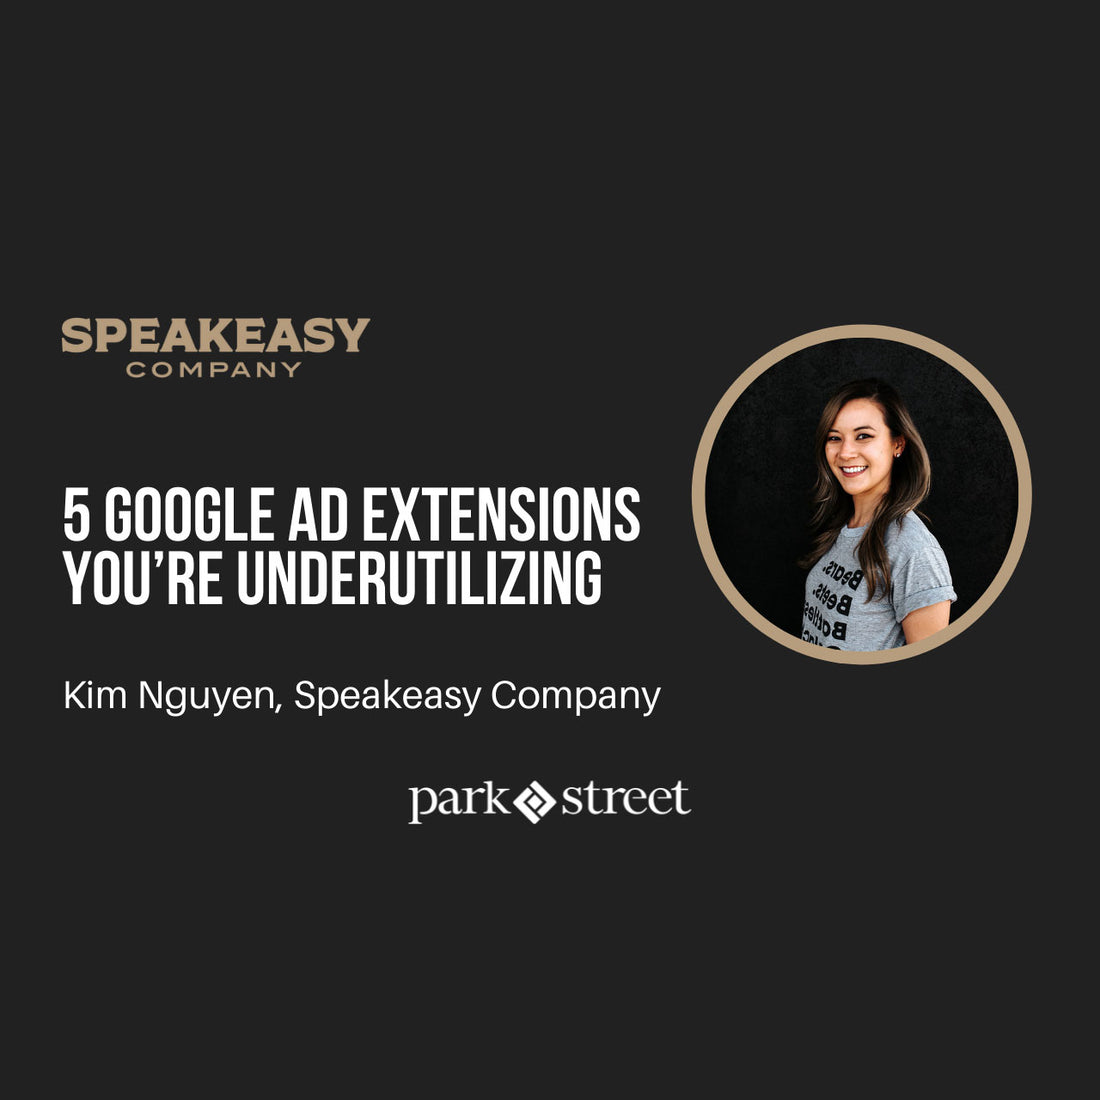 5 Google Ad Extensions You're Underutilizing